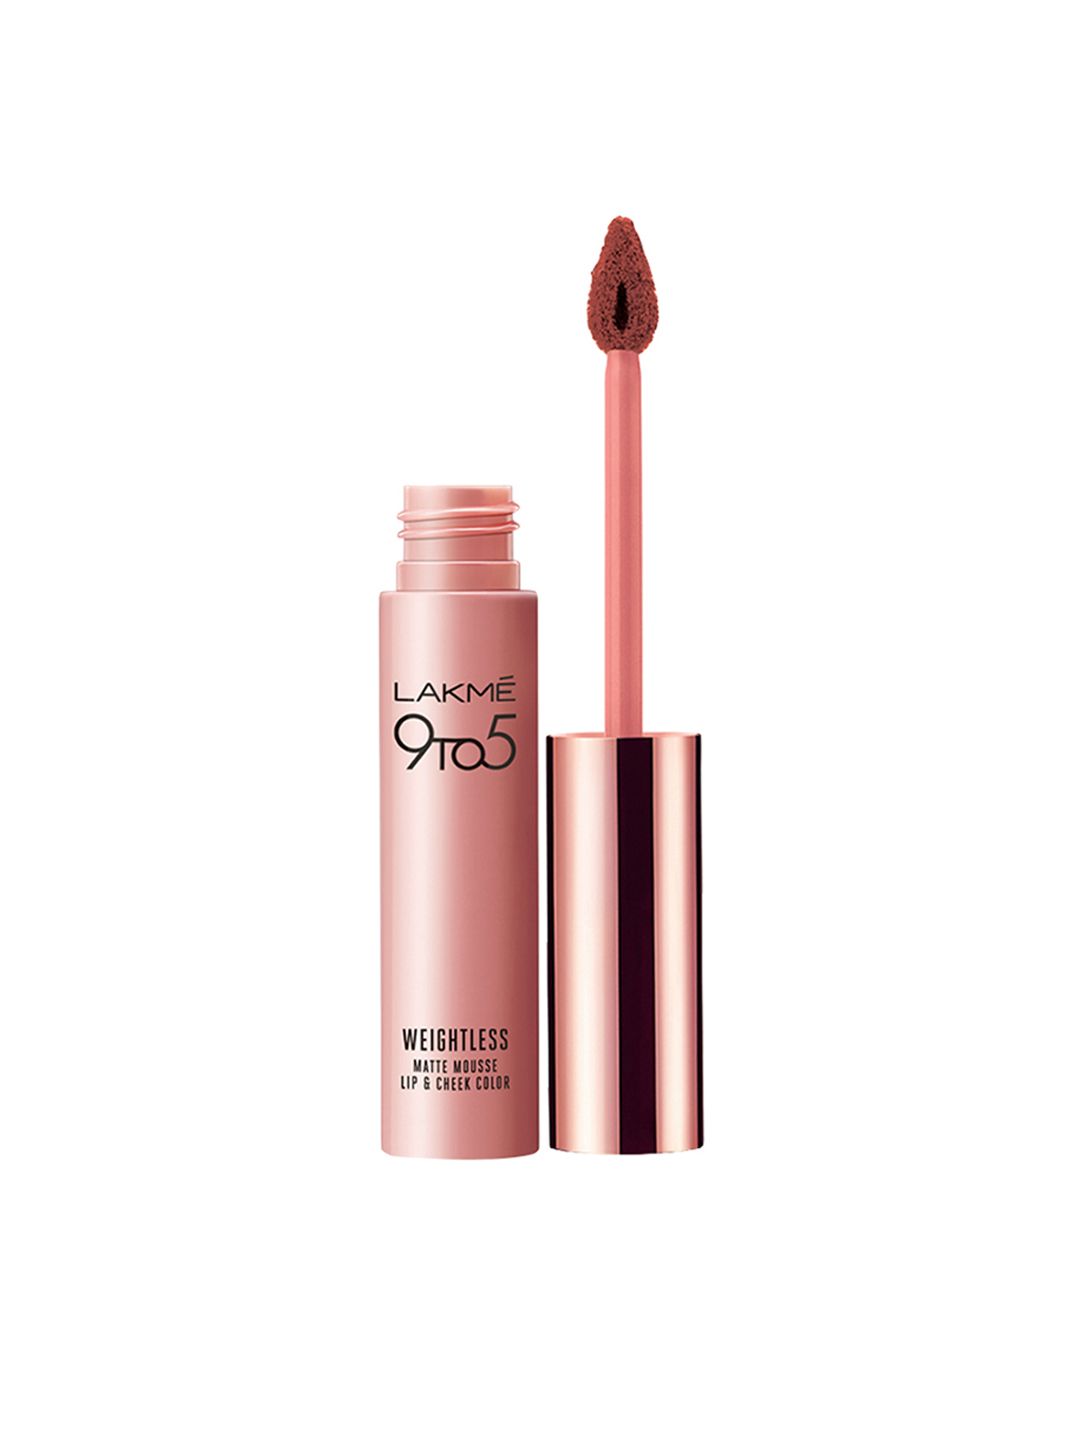 Lakme 9to5 Weightless Matte Mousse Touch Lip & Cheek Color - Burgundy Lush Price in India